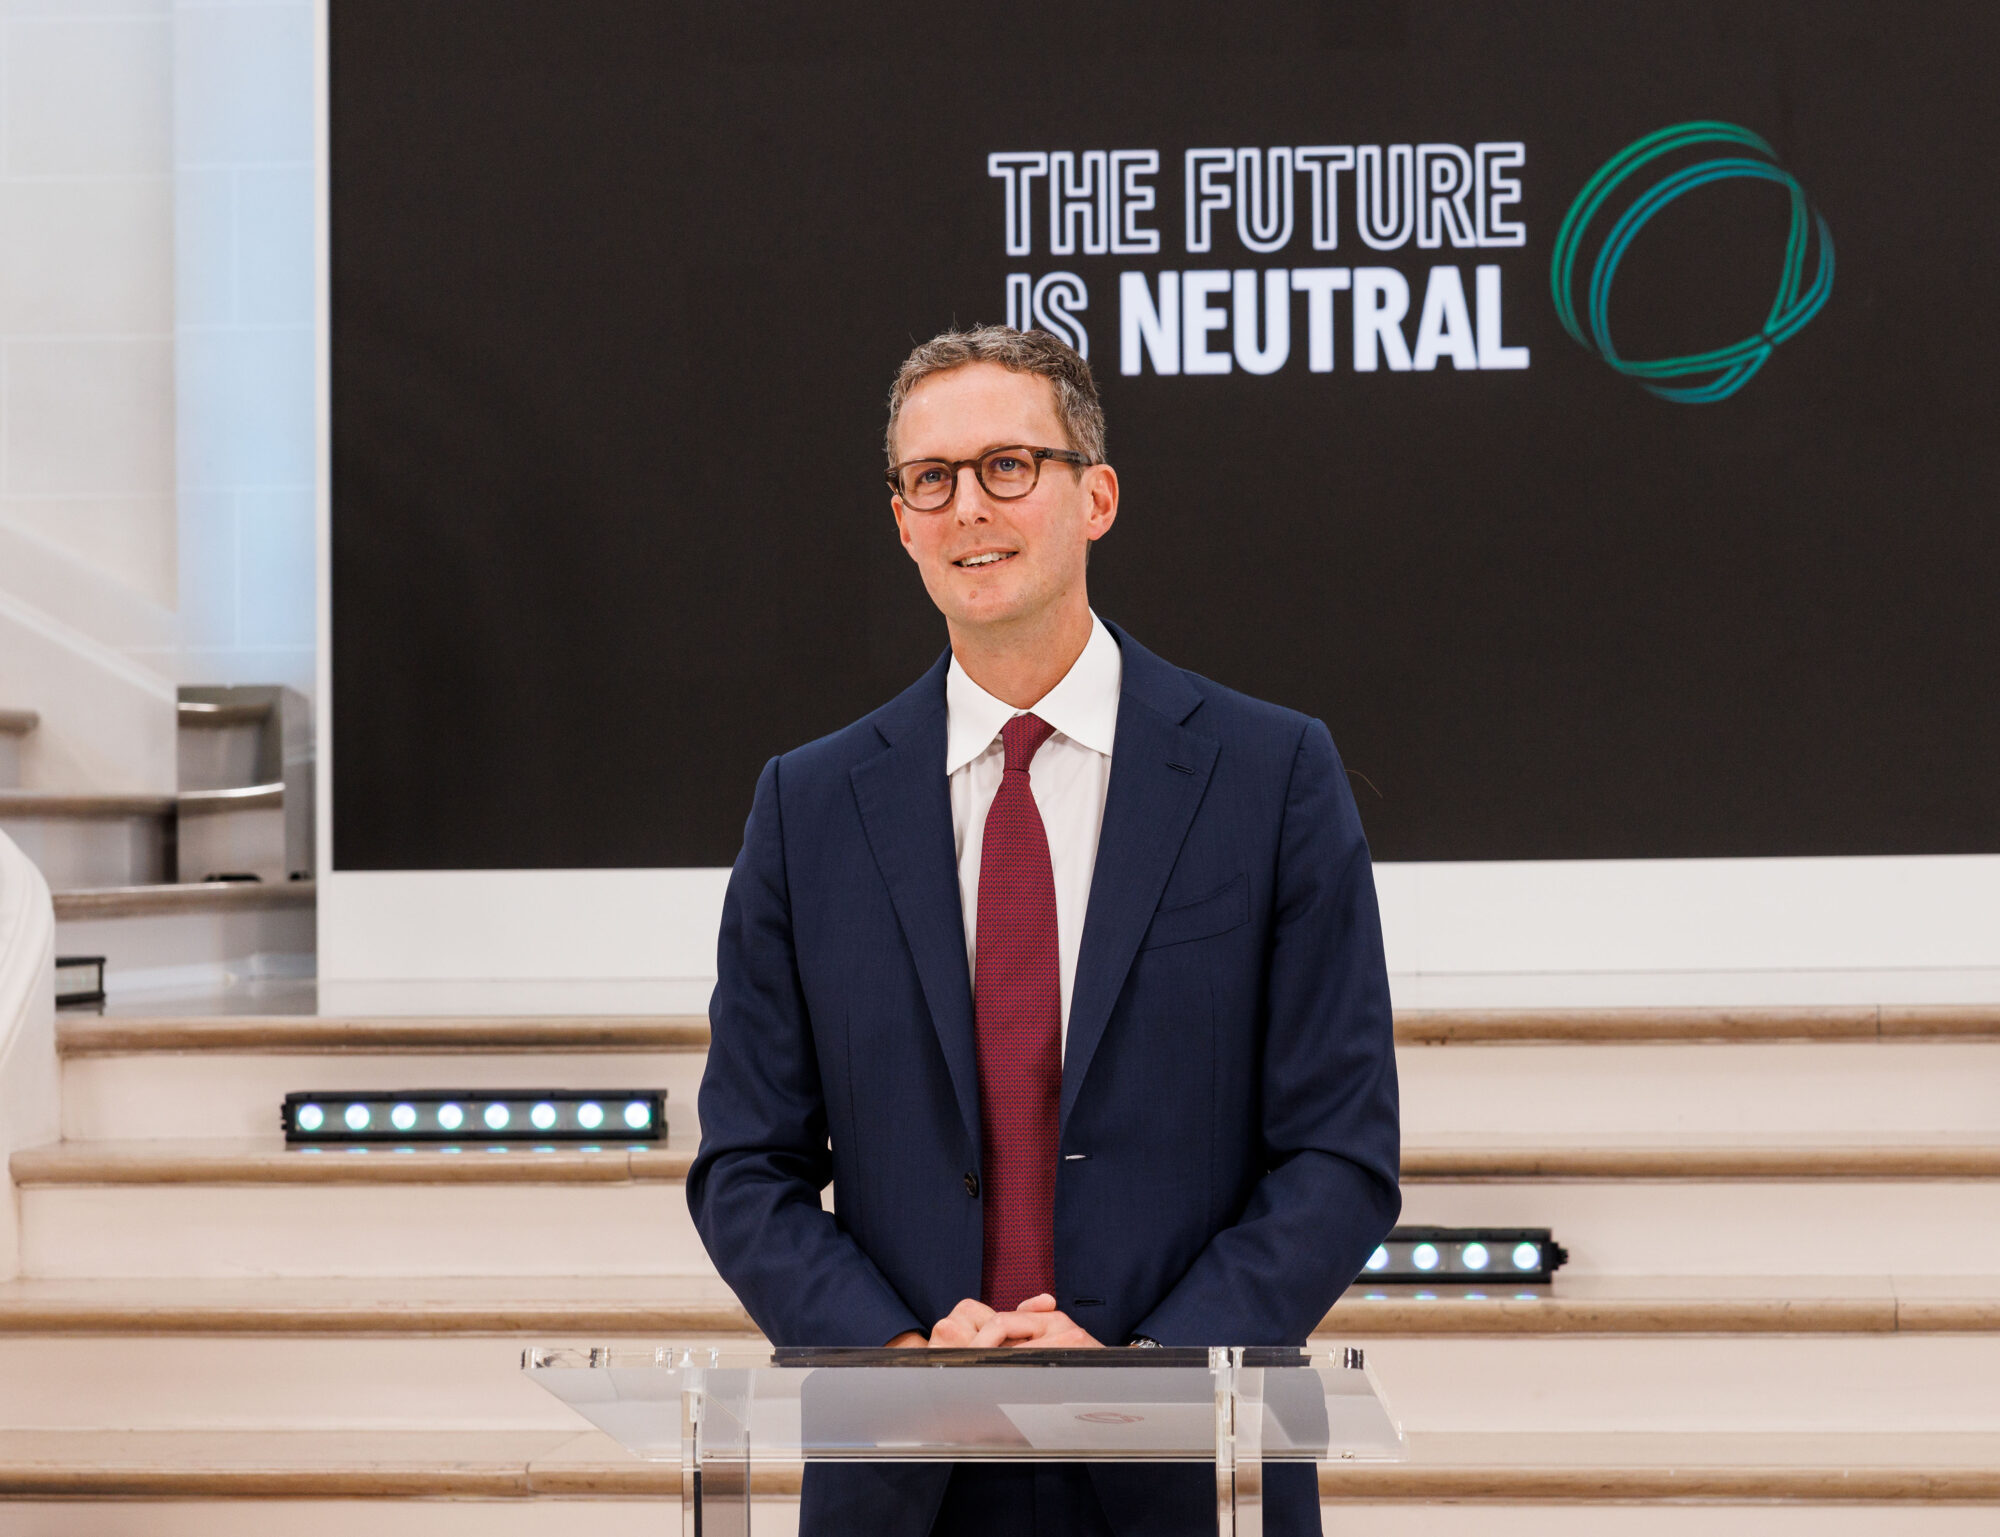 Jean-Philippe Bahuaud, CEO of The Future Is NEUTRAL